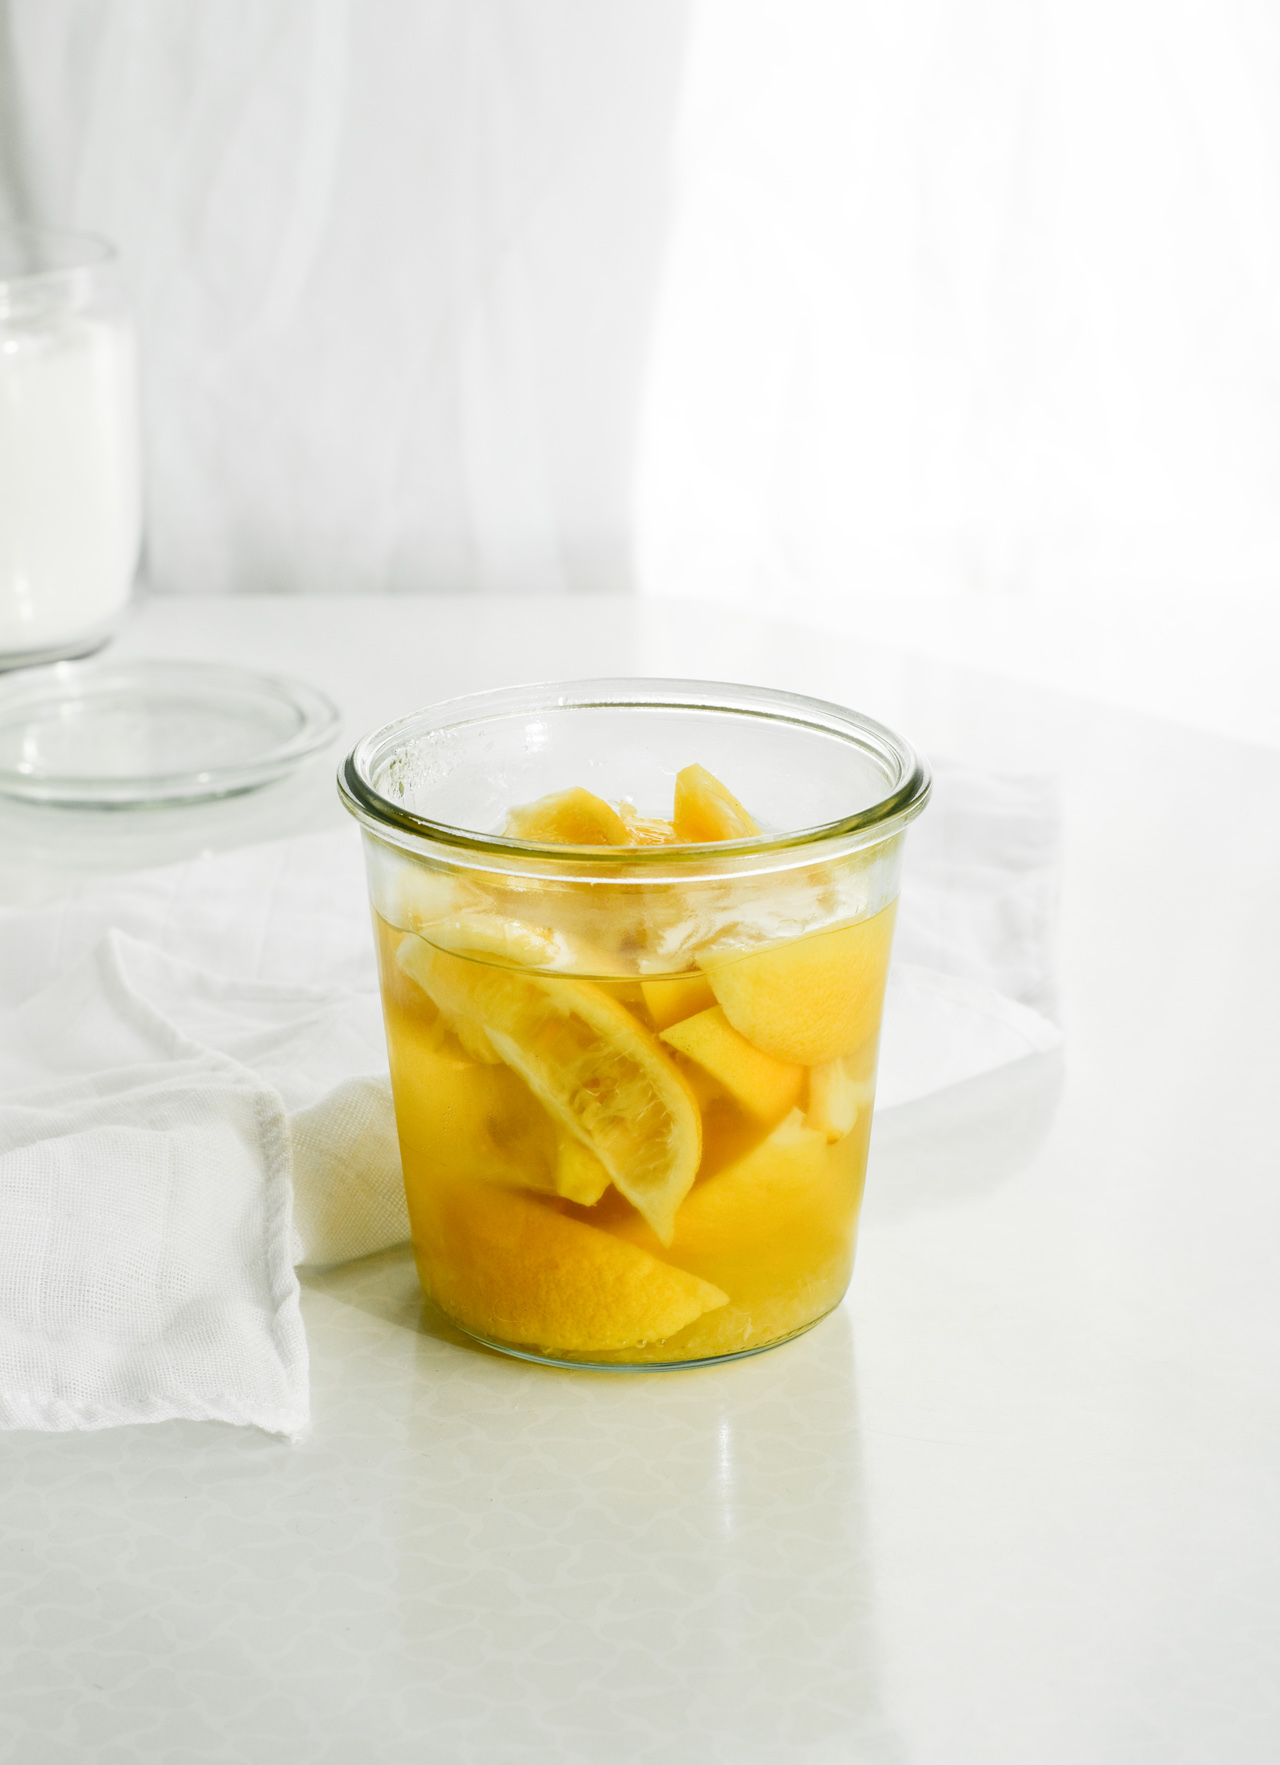 Recipe for quick preserved lemons - the perfect addition to tagine, soup, stew, etc.